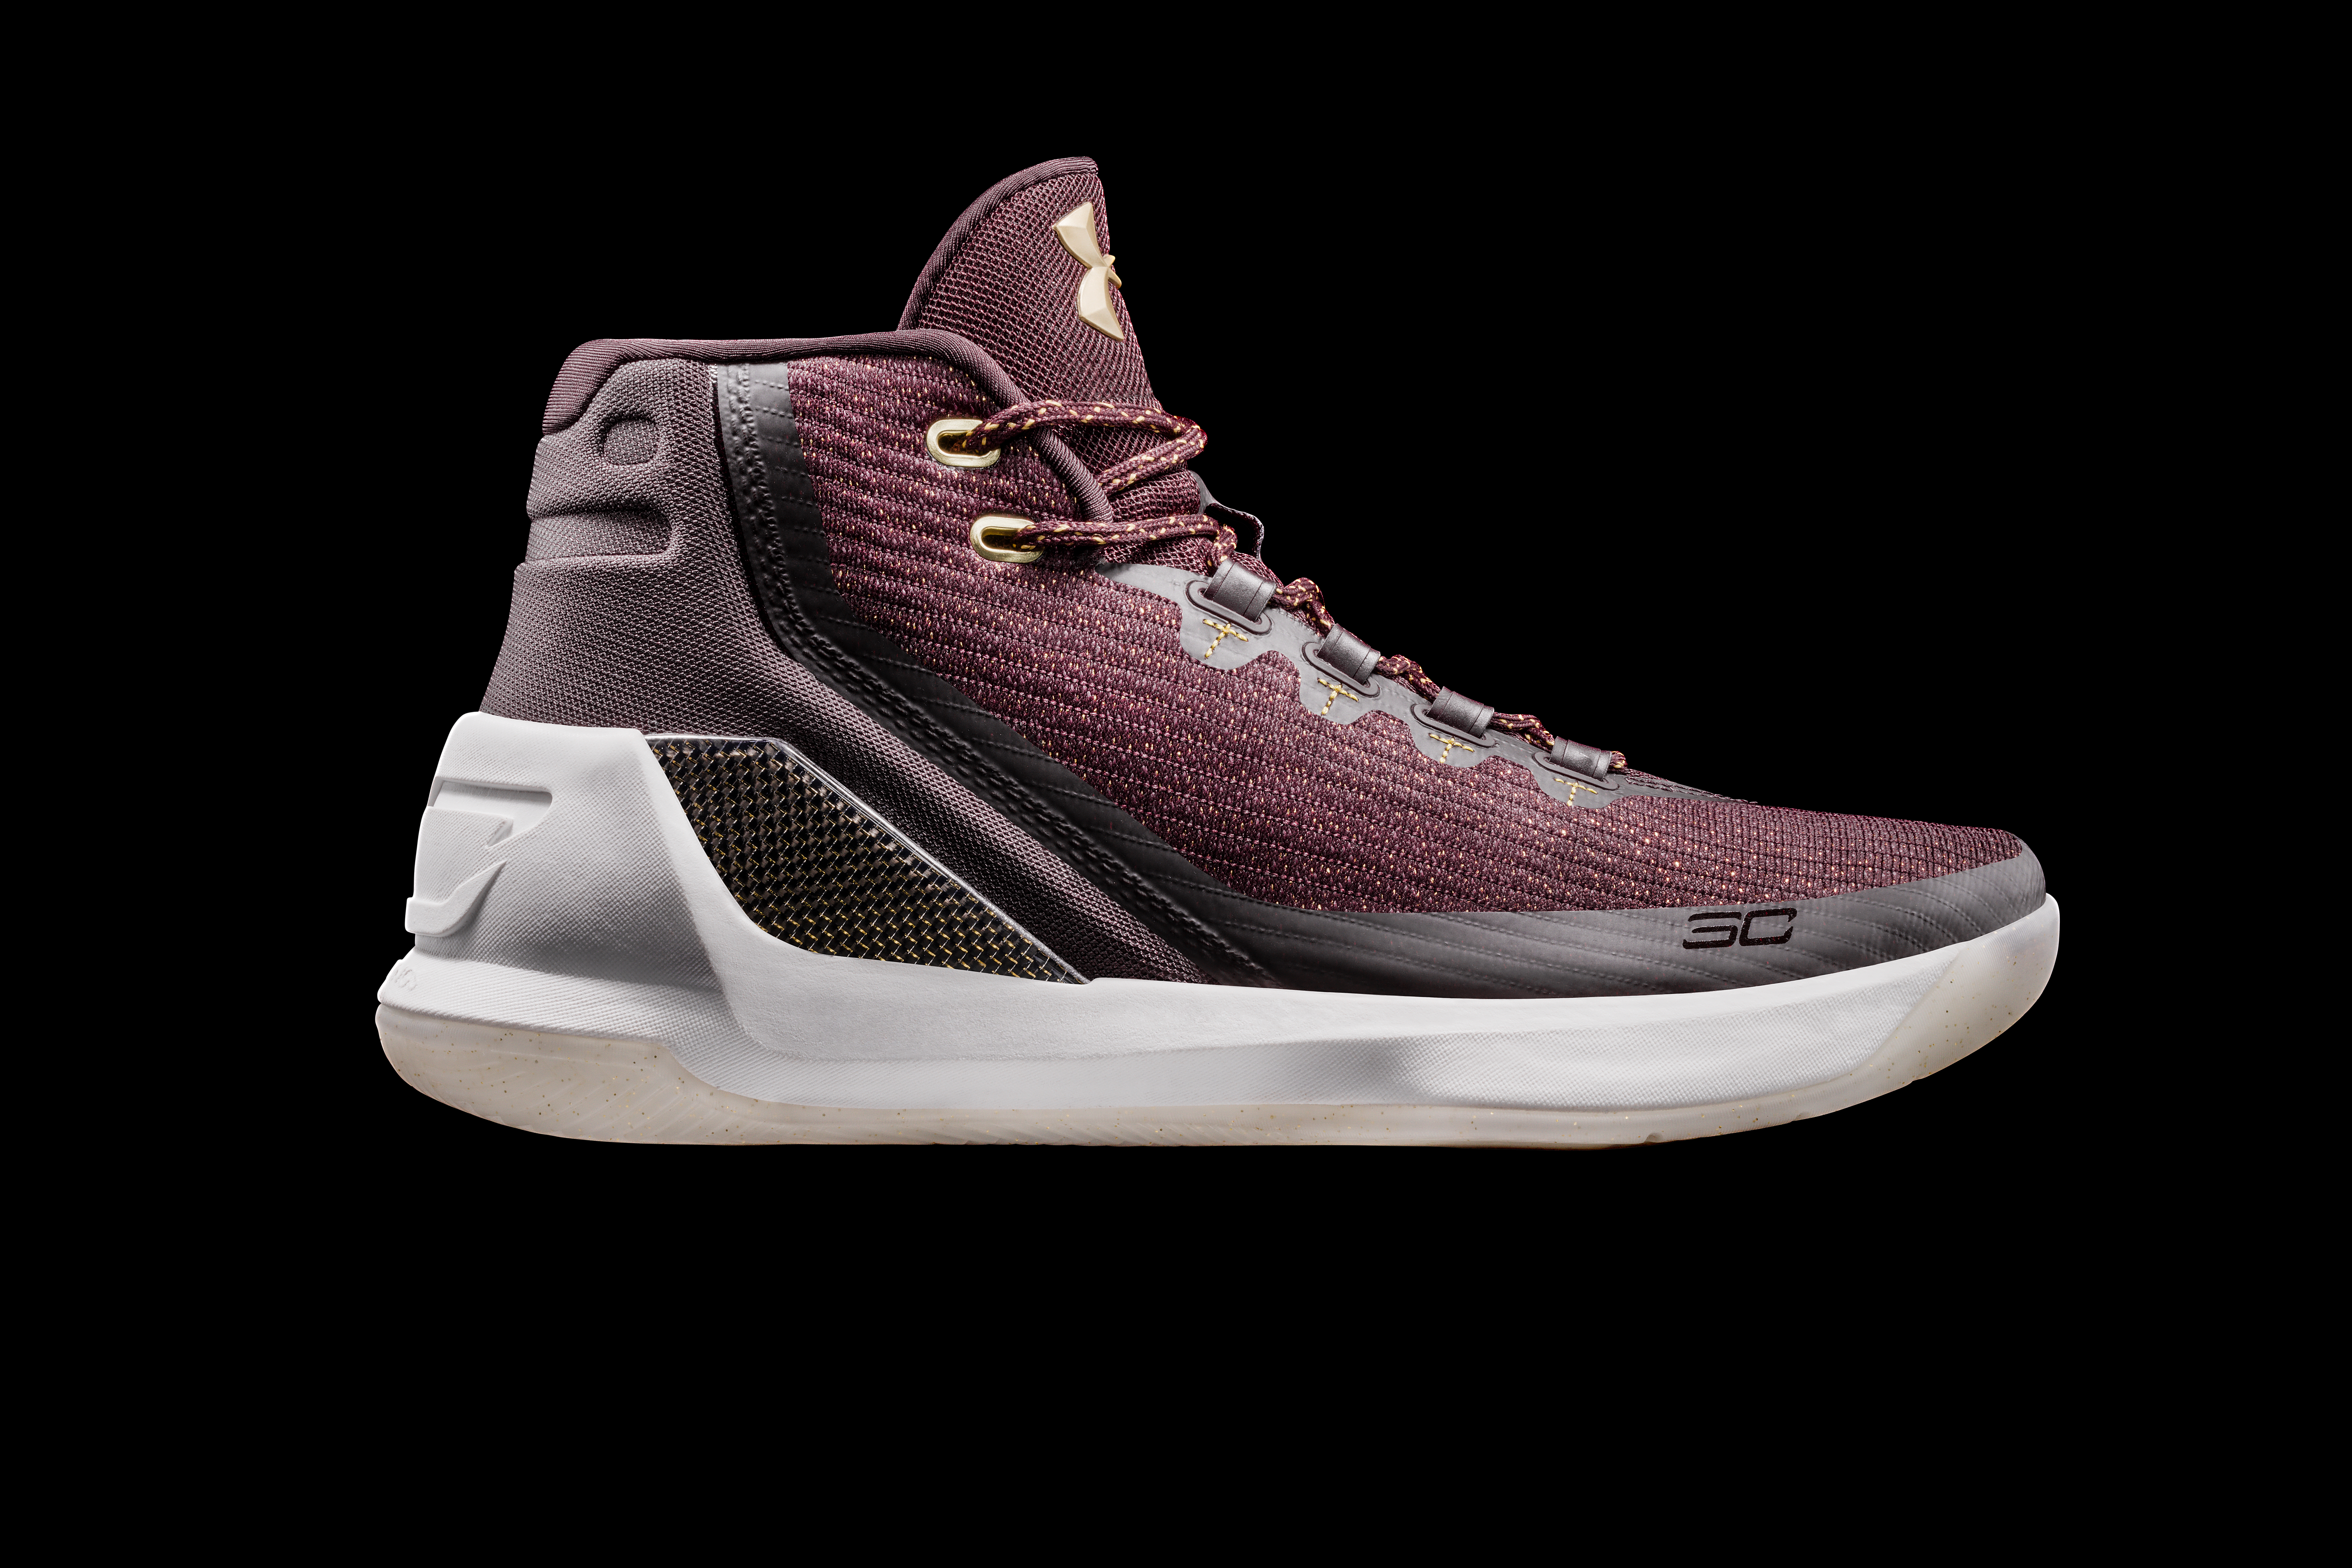 Under Armour Curry 3 Releasing in Three 